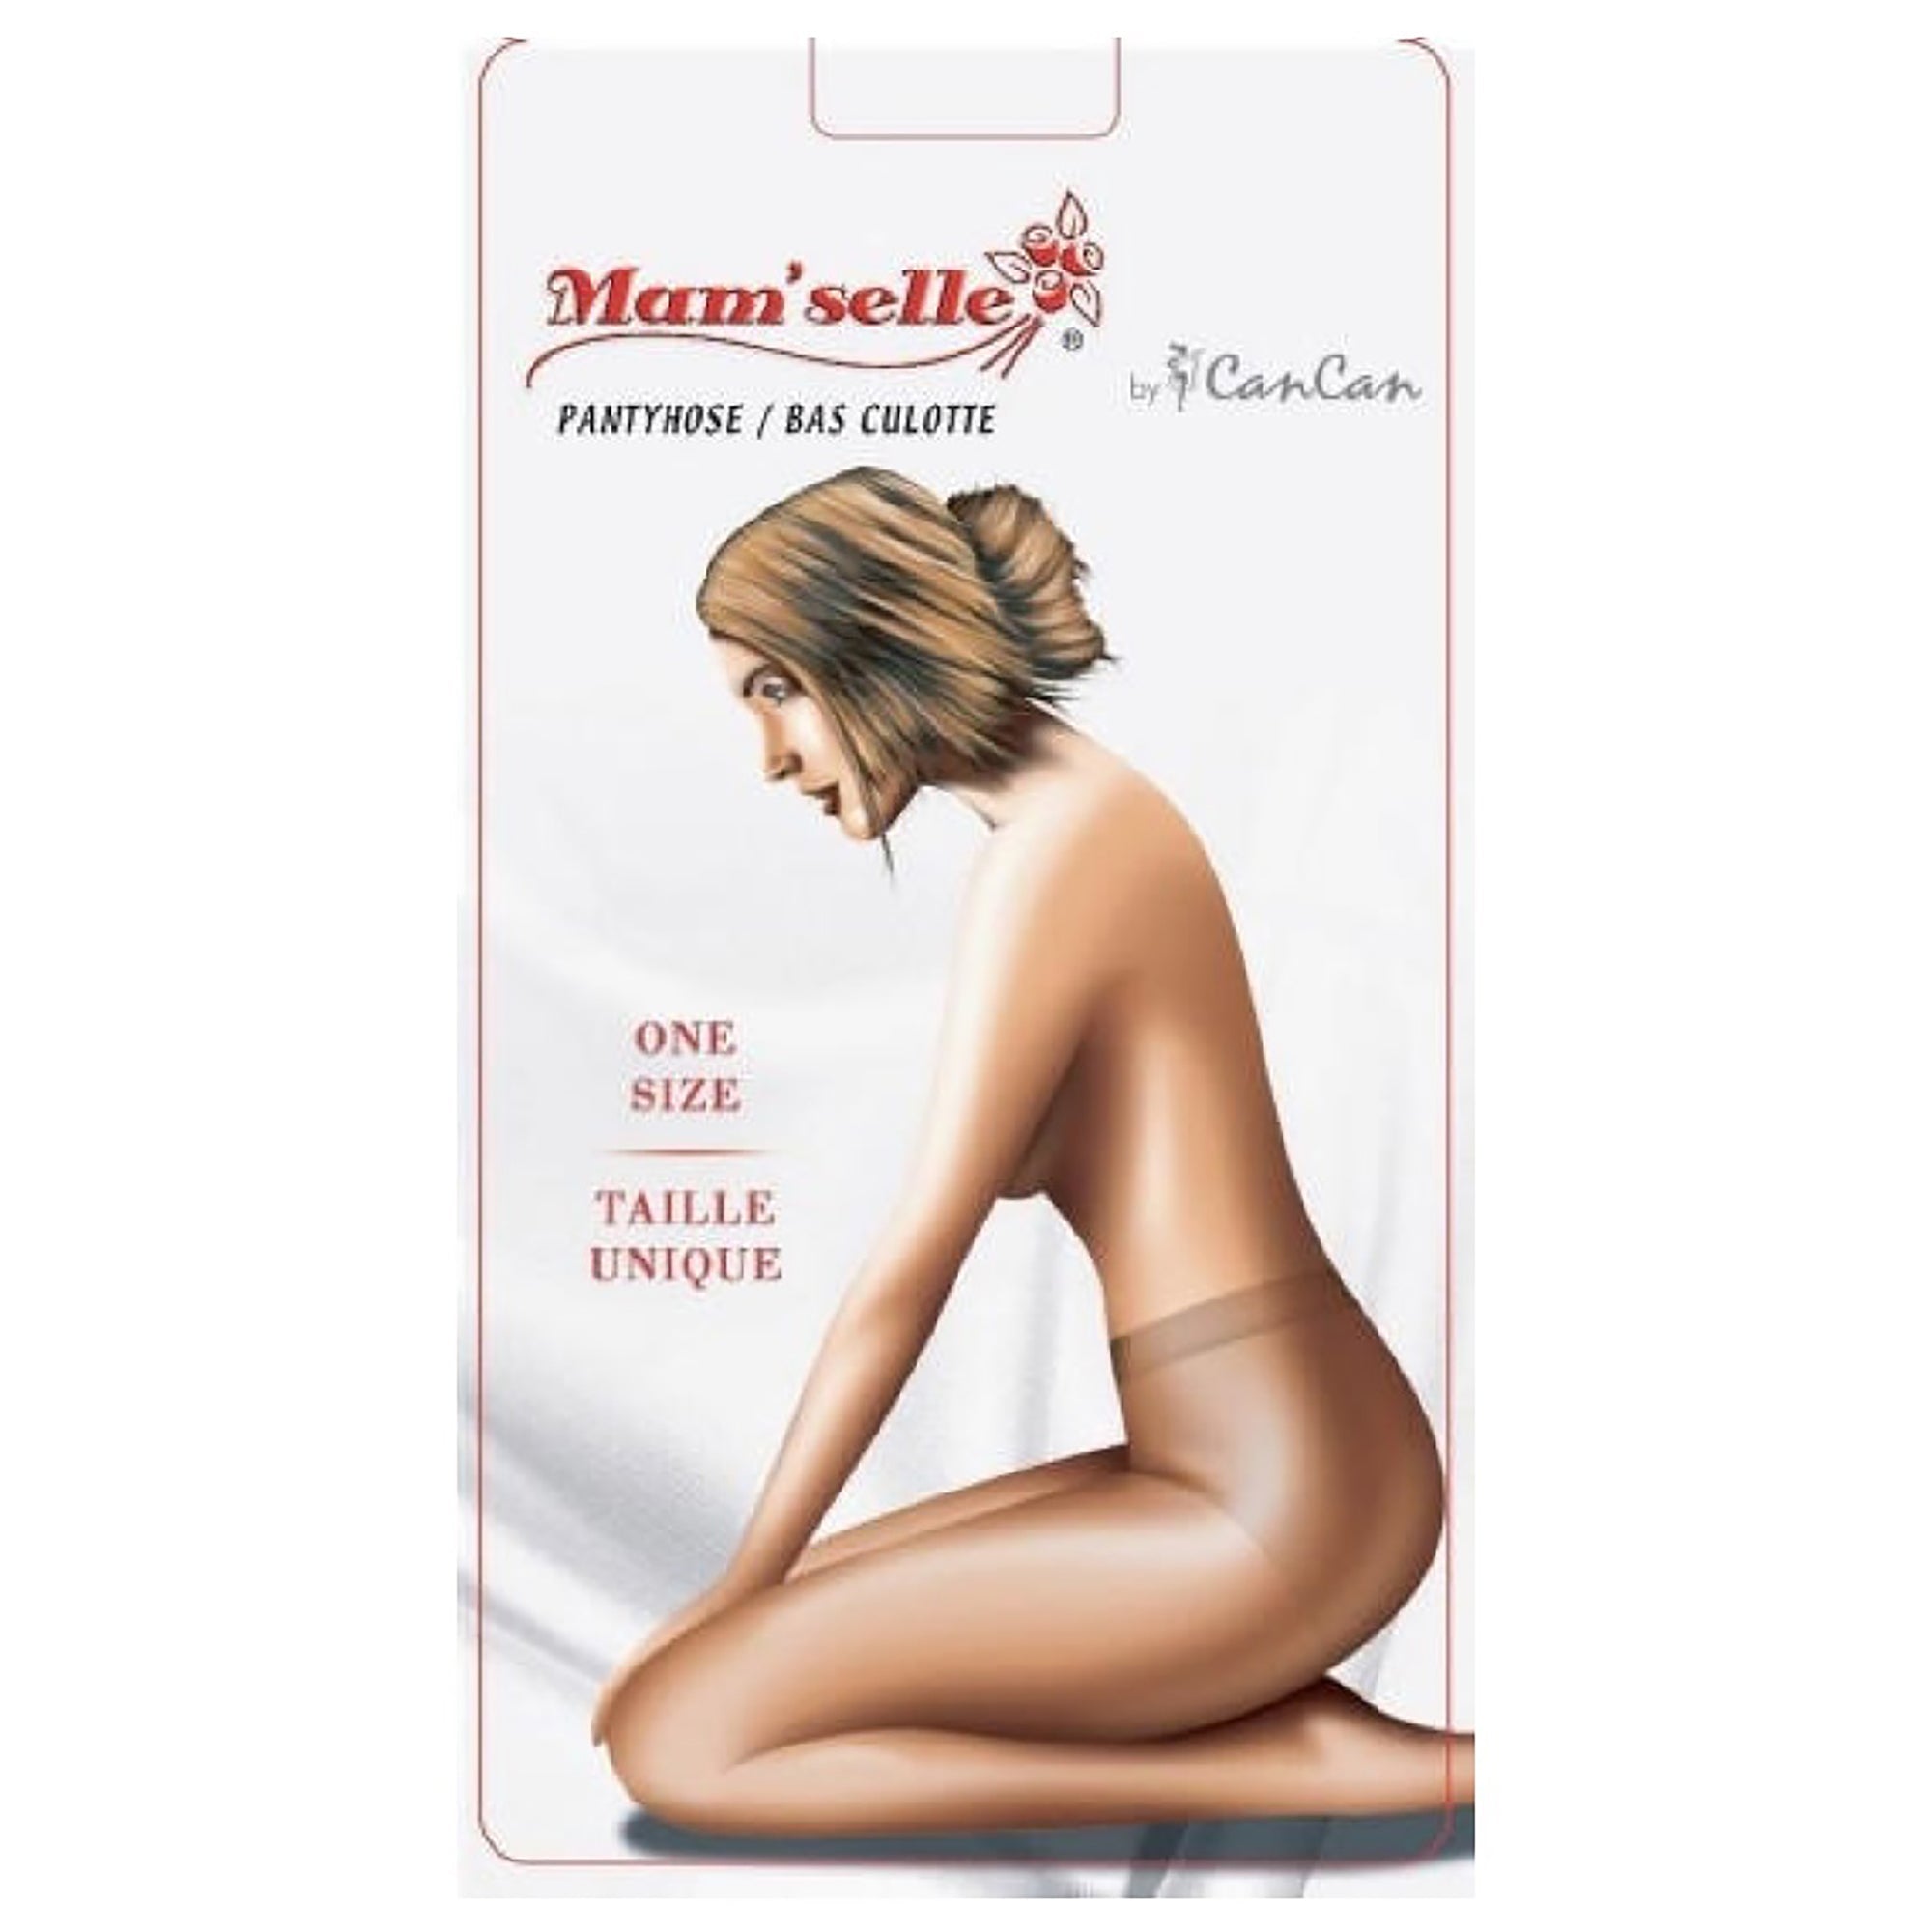 Mam'selle Panty Hose - Spice 20 Denier - One Size (100-150lbs)